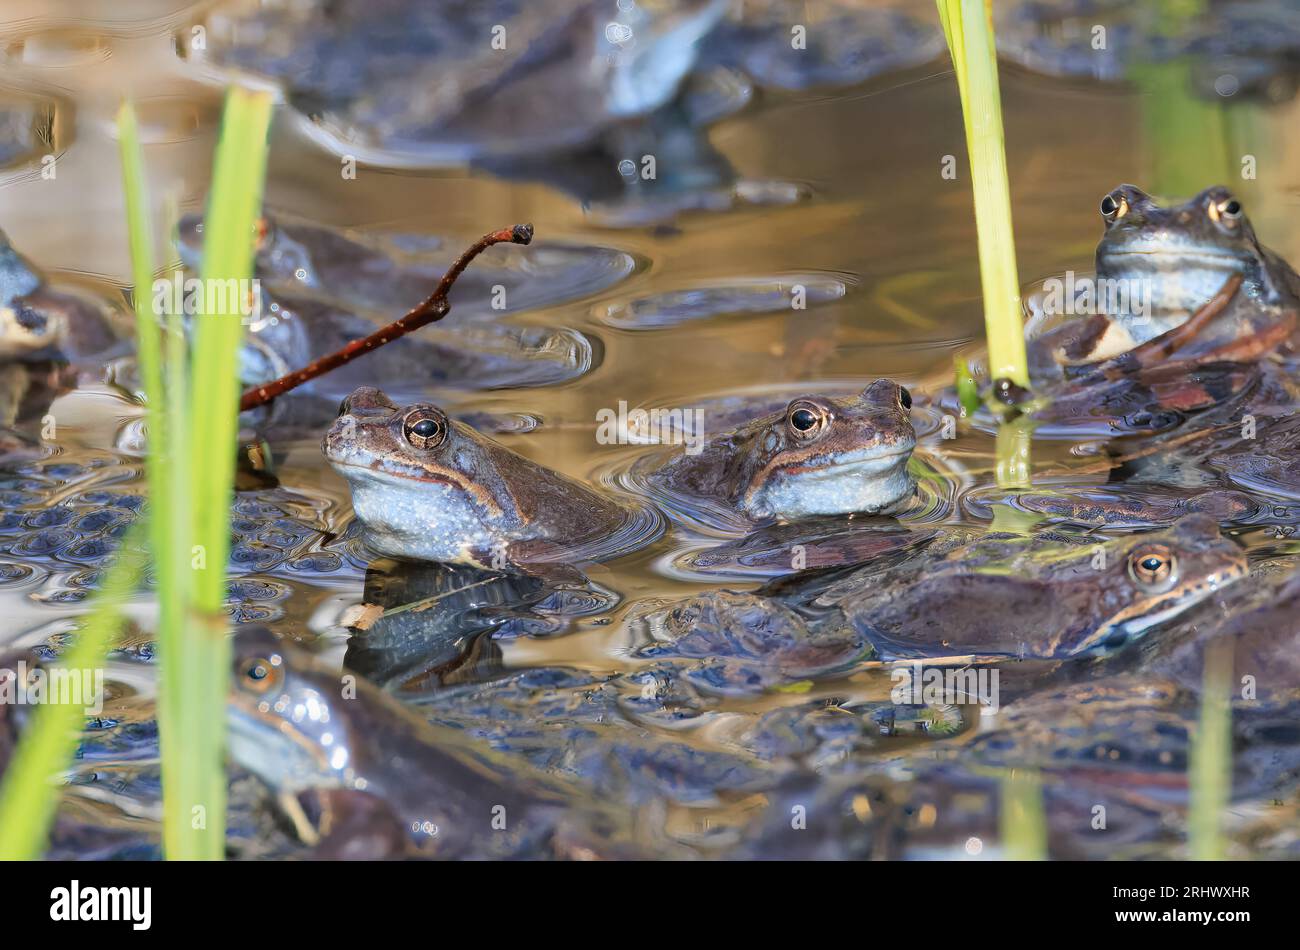 Moor Frogs (Rana arvalis) head over water looking at camera, Bialowieza forest, Poland, Europe Stock Photo